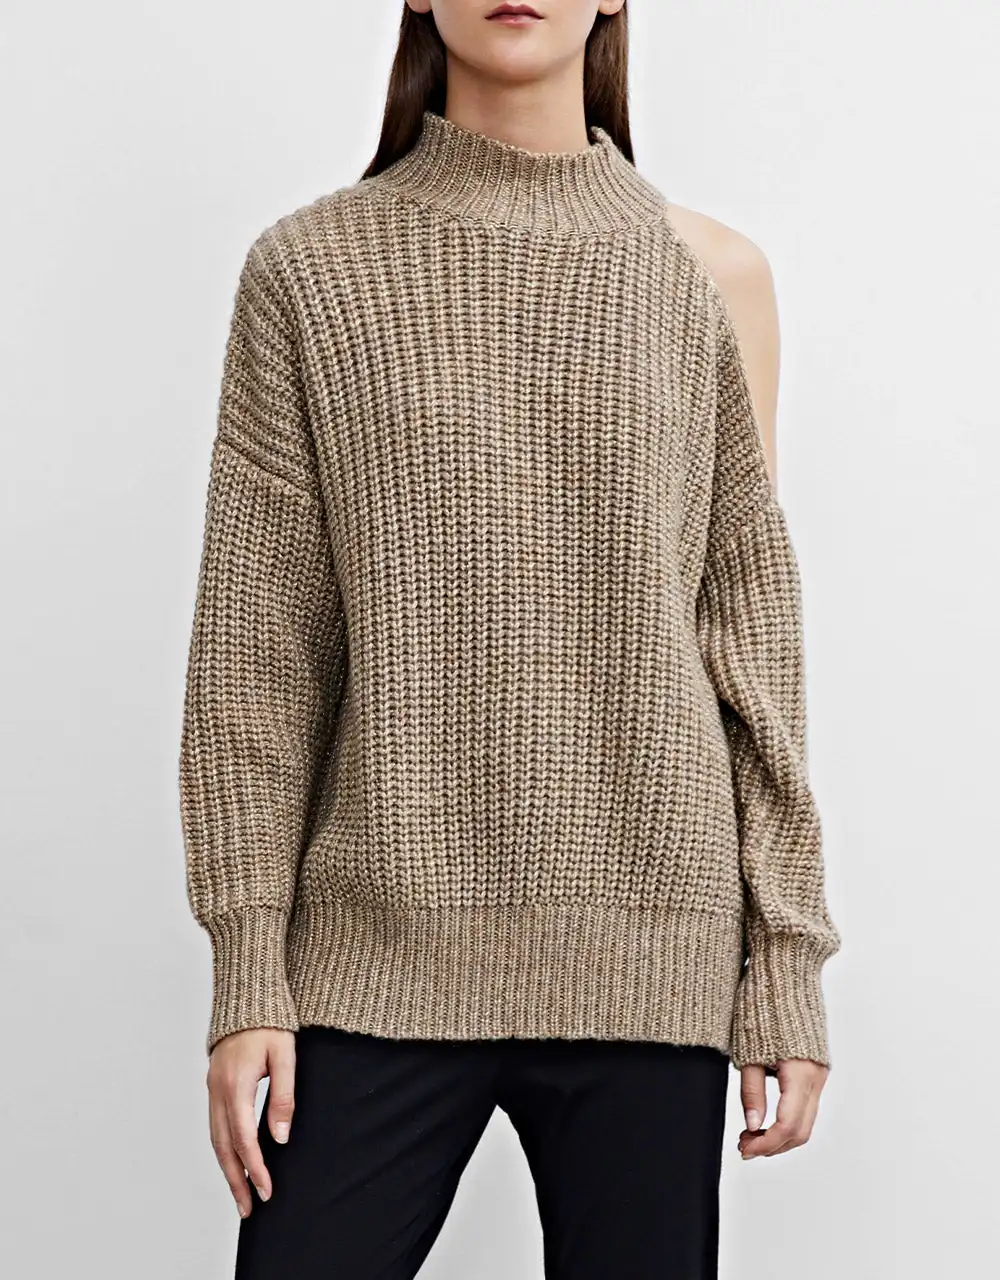 Urban Revivo Off Shoulder Knitting Sweater Long Sleeved Loose Pullover Knitted Sweater Asymmetrical Women Fashion Tops